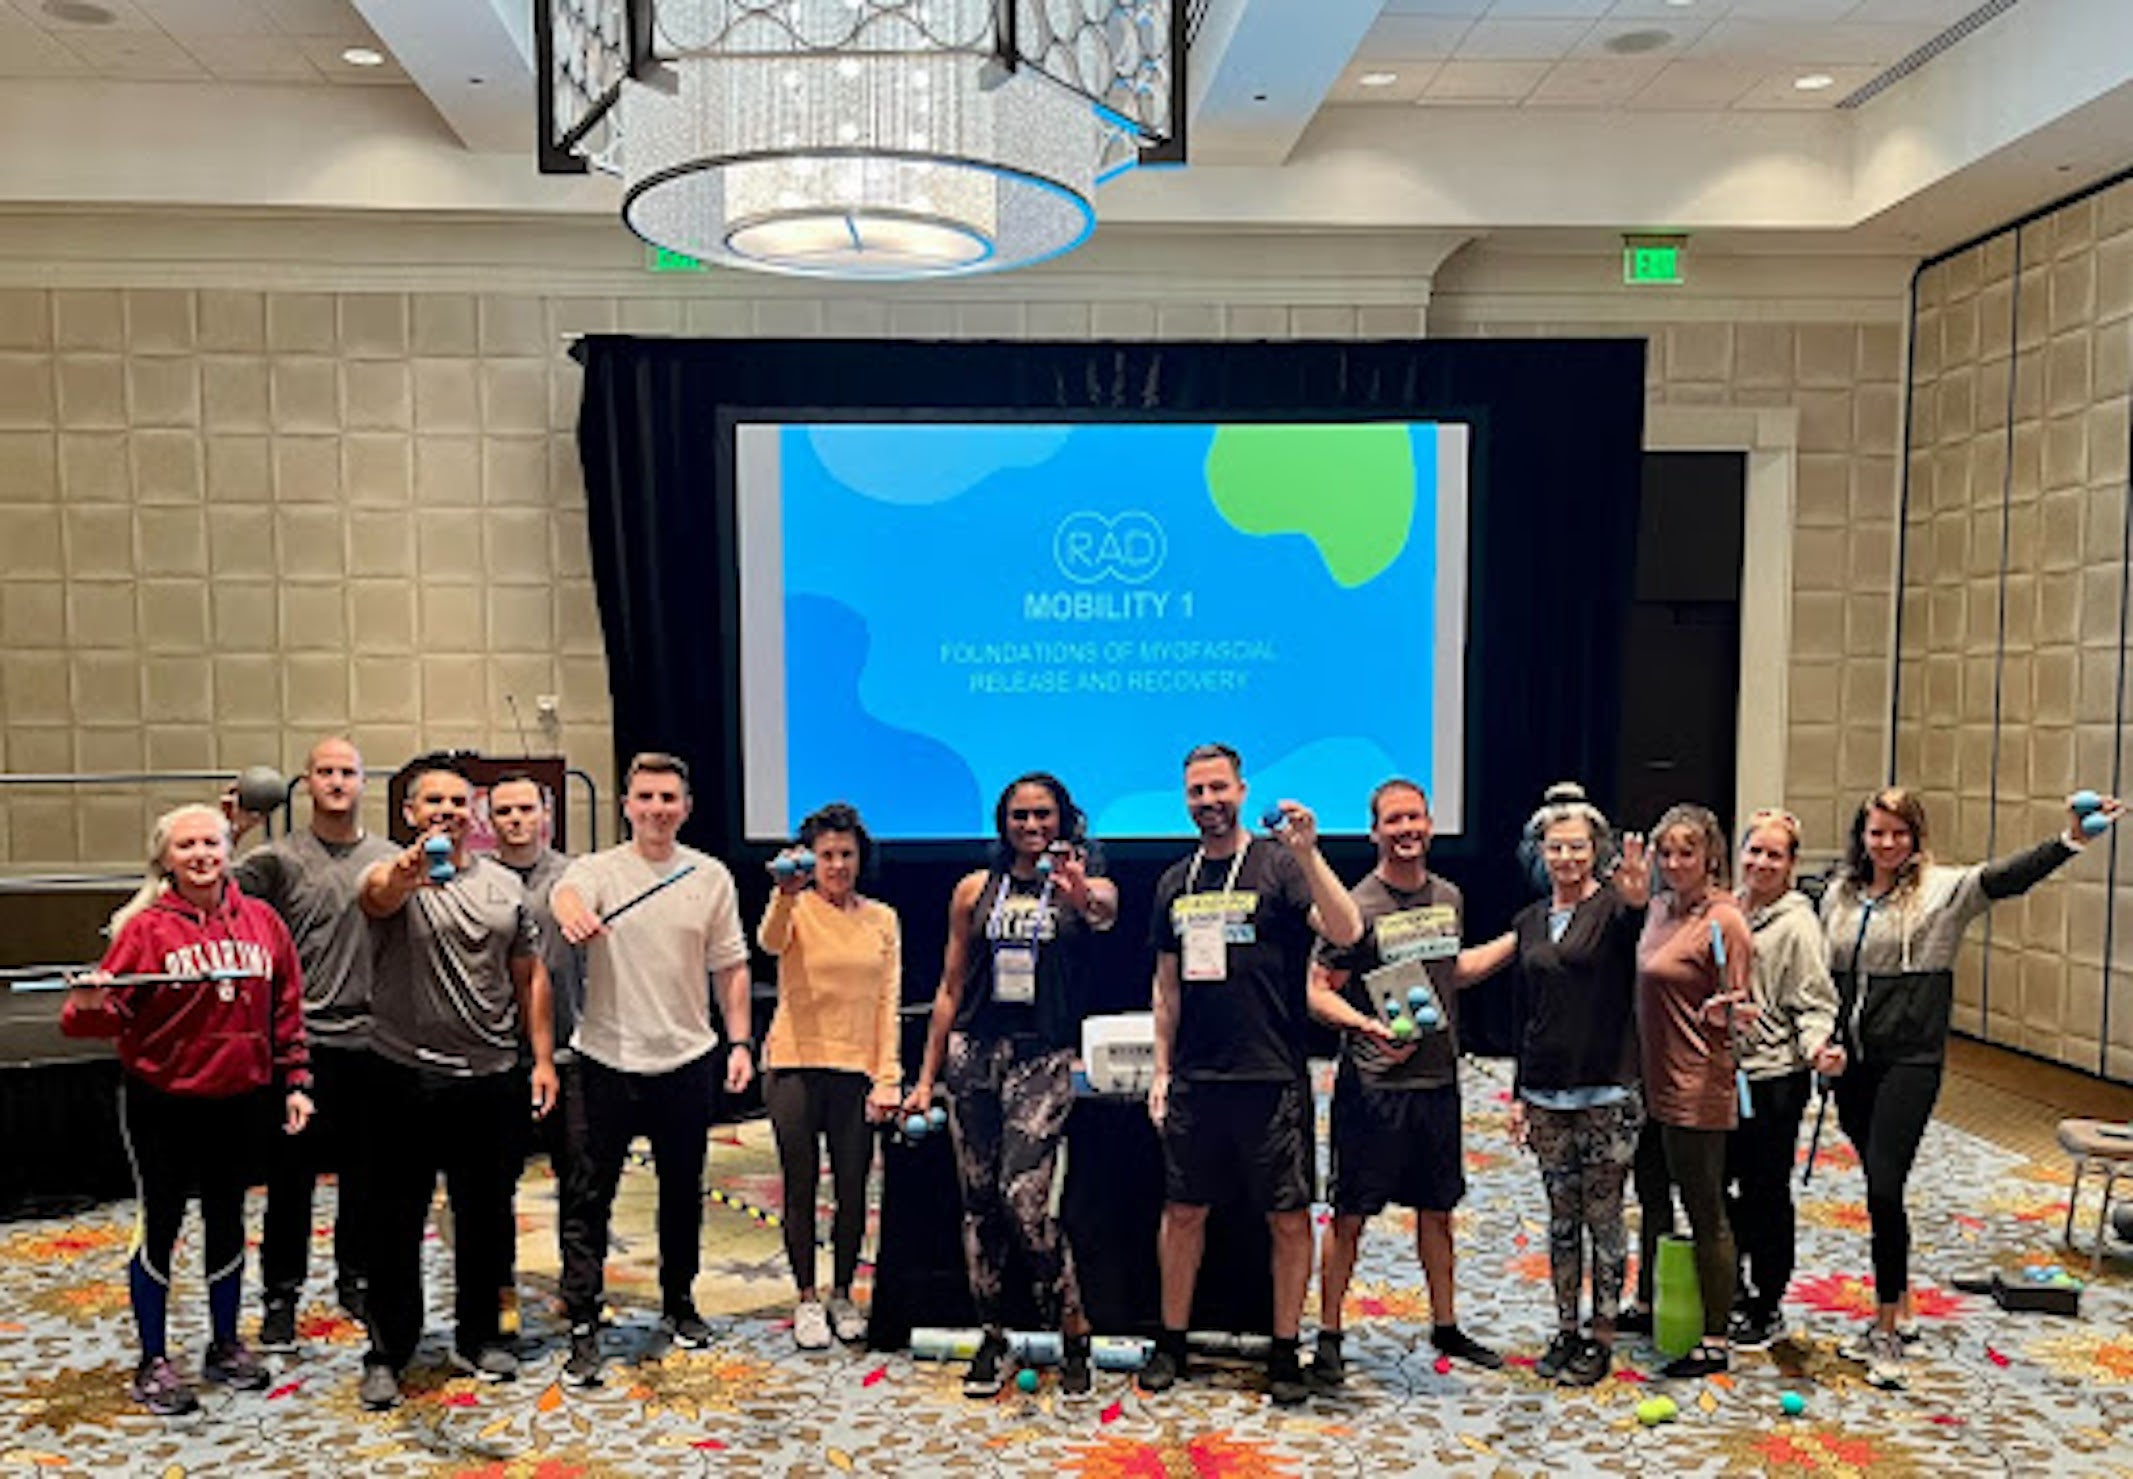 TRIO STEM Scholars student Bruce Hill attends ACSM International Health and Fitness Summit in Dallas, Texas